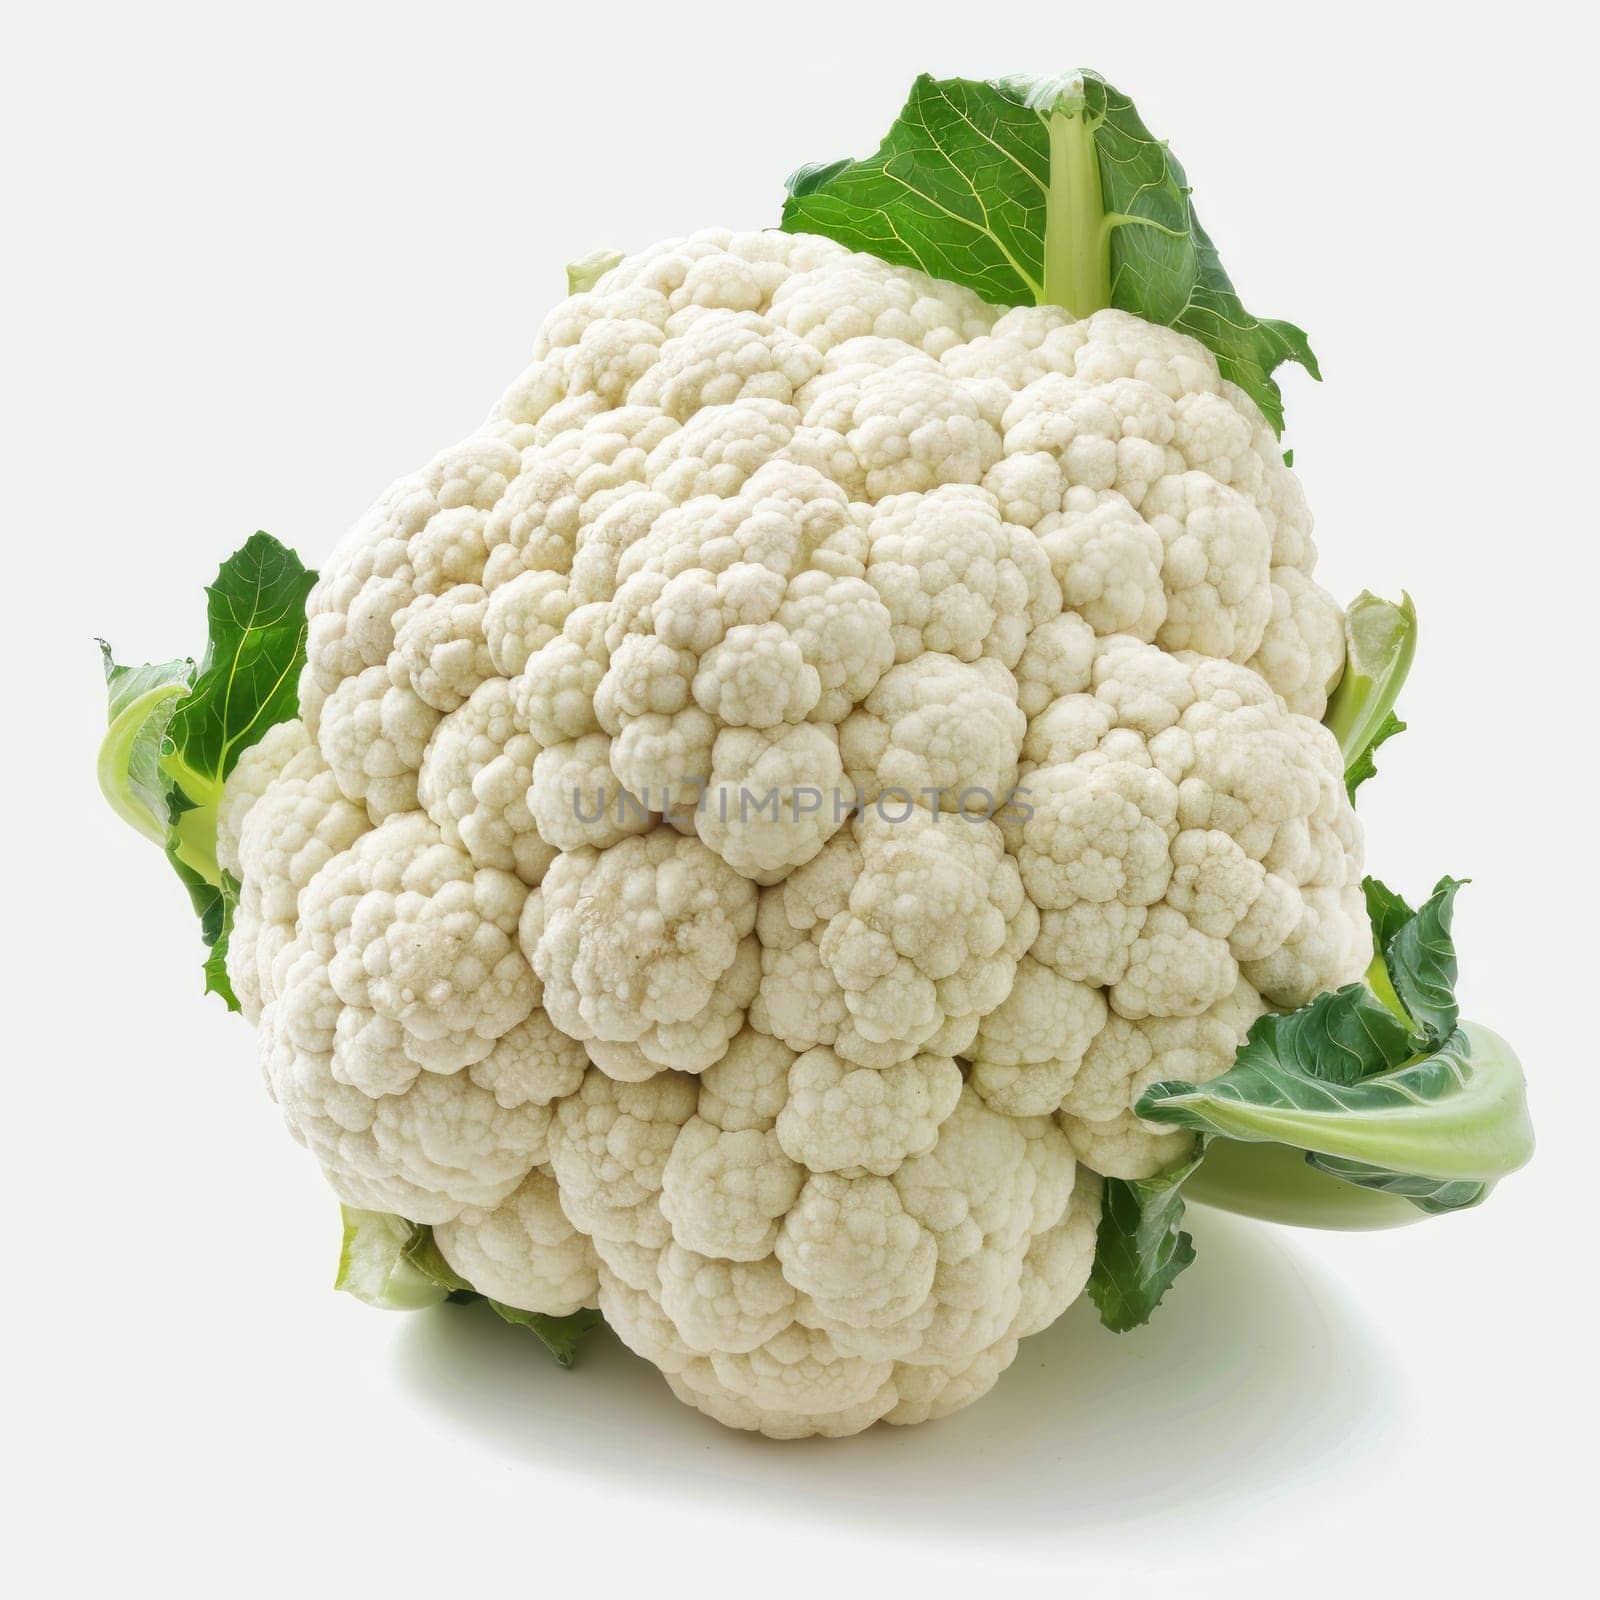 A white cauliflower with green leaves on white background. High quality photo.